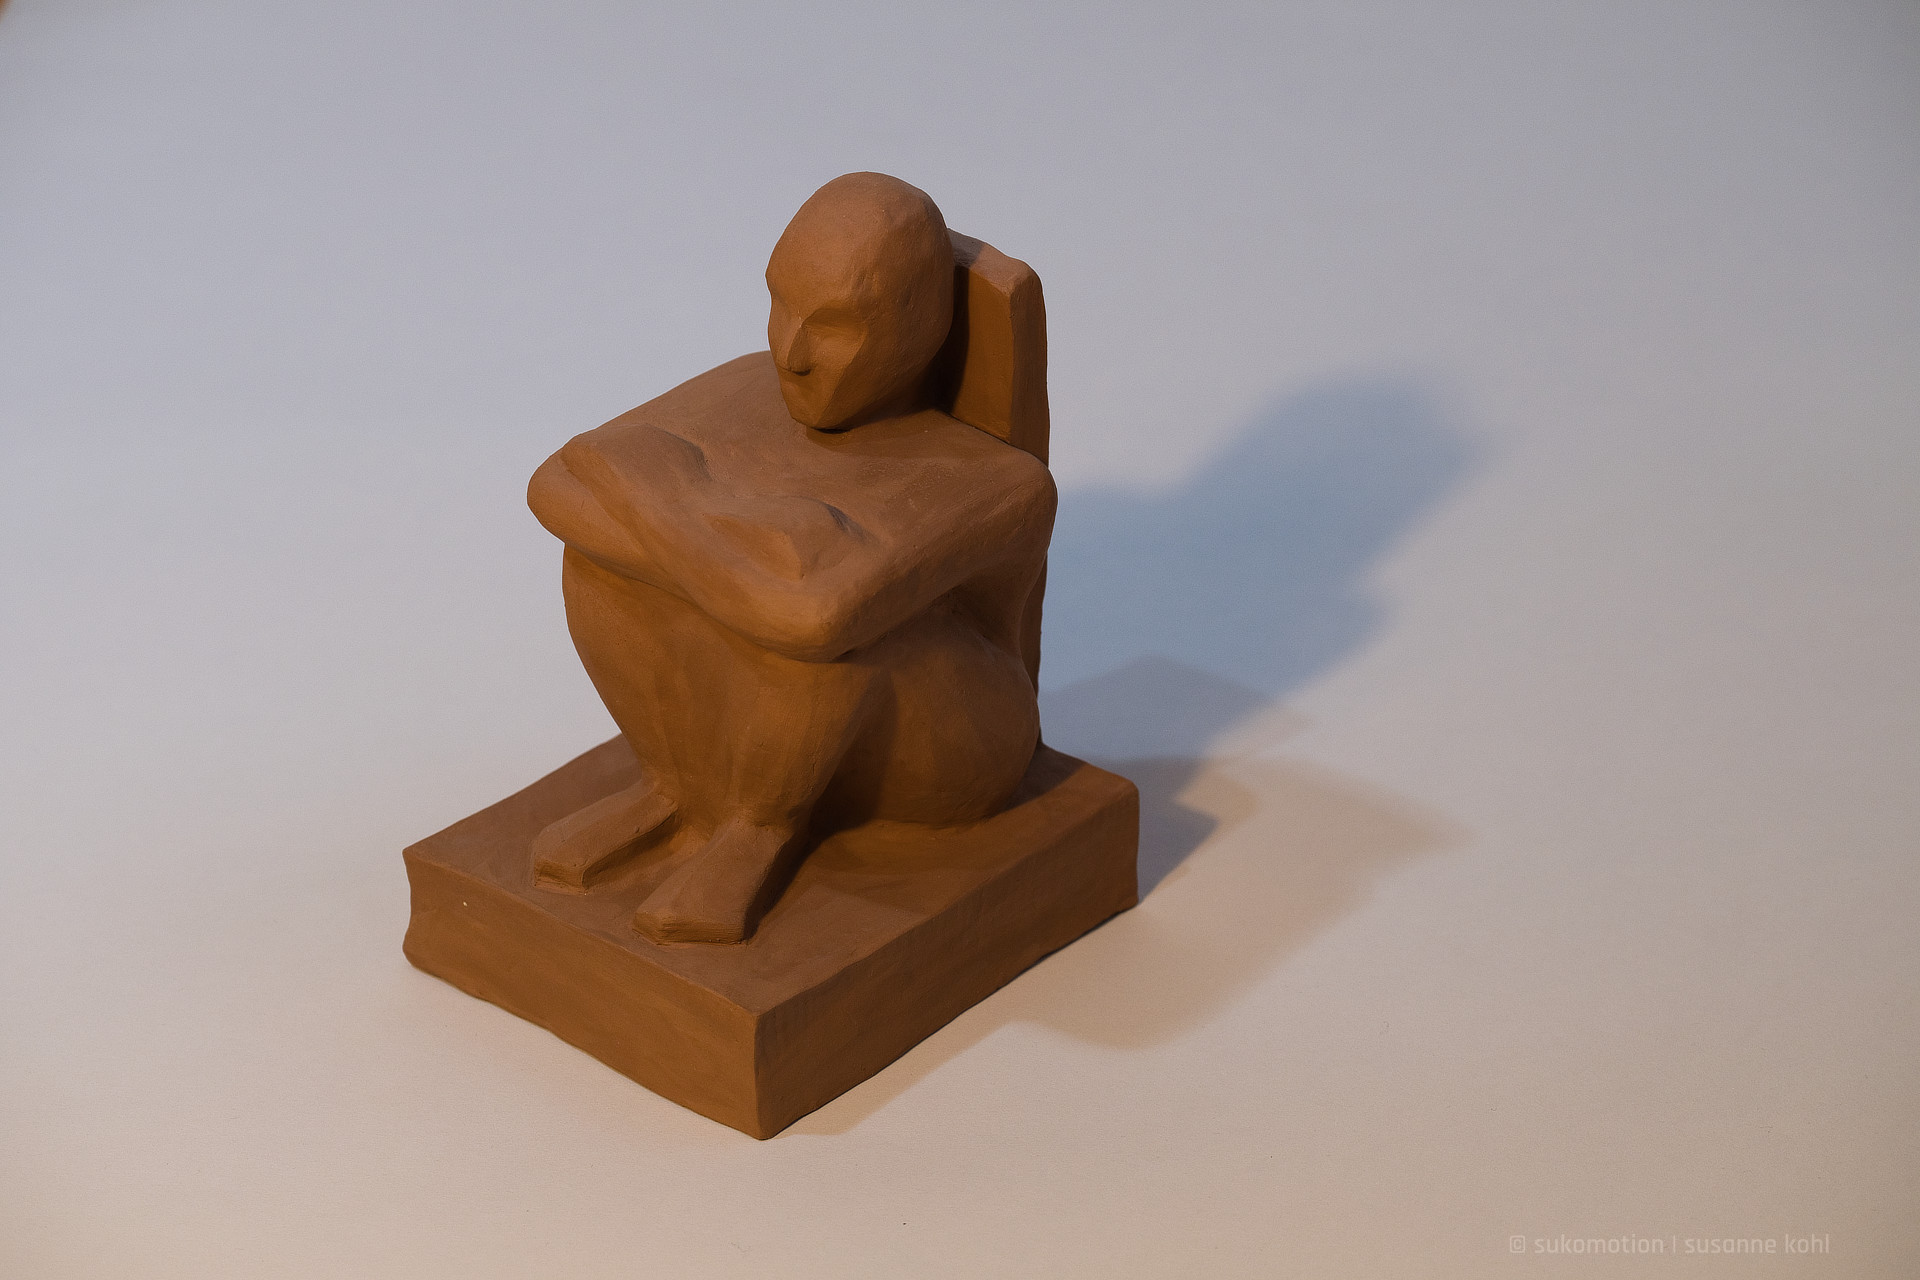 block statue – sculpture made of clay – by sukomotion | susanne kohl - berlin